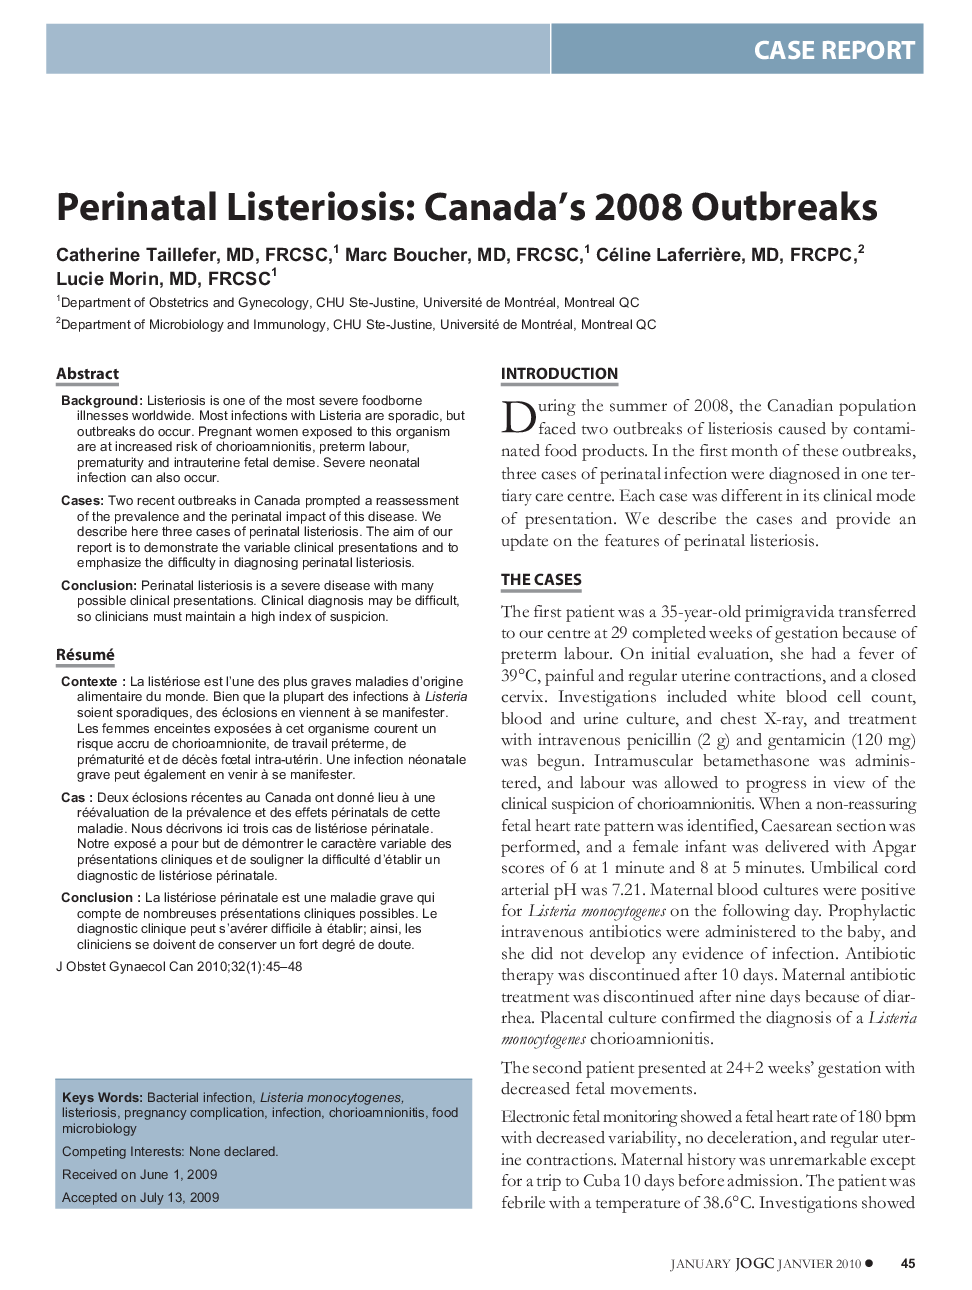 Perinatal Listeriosis: Canada's 2008 Outbreaks